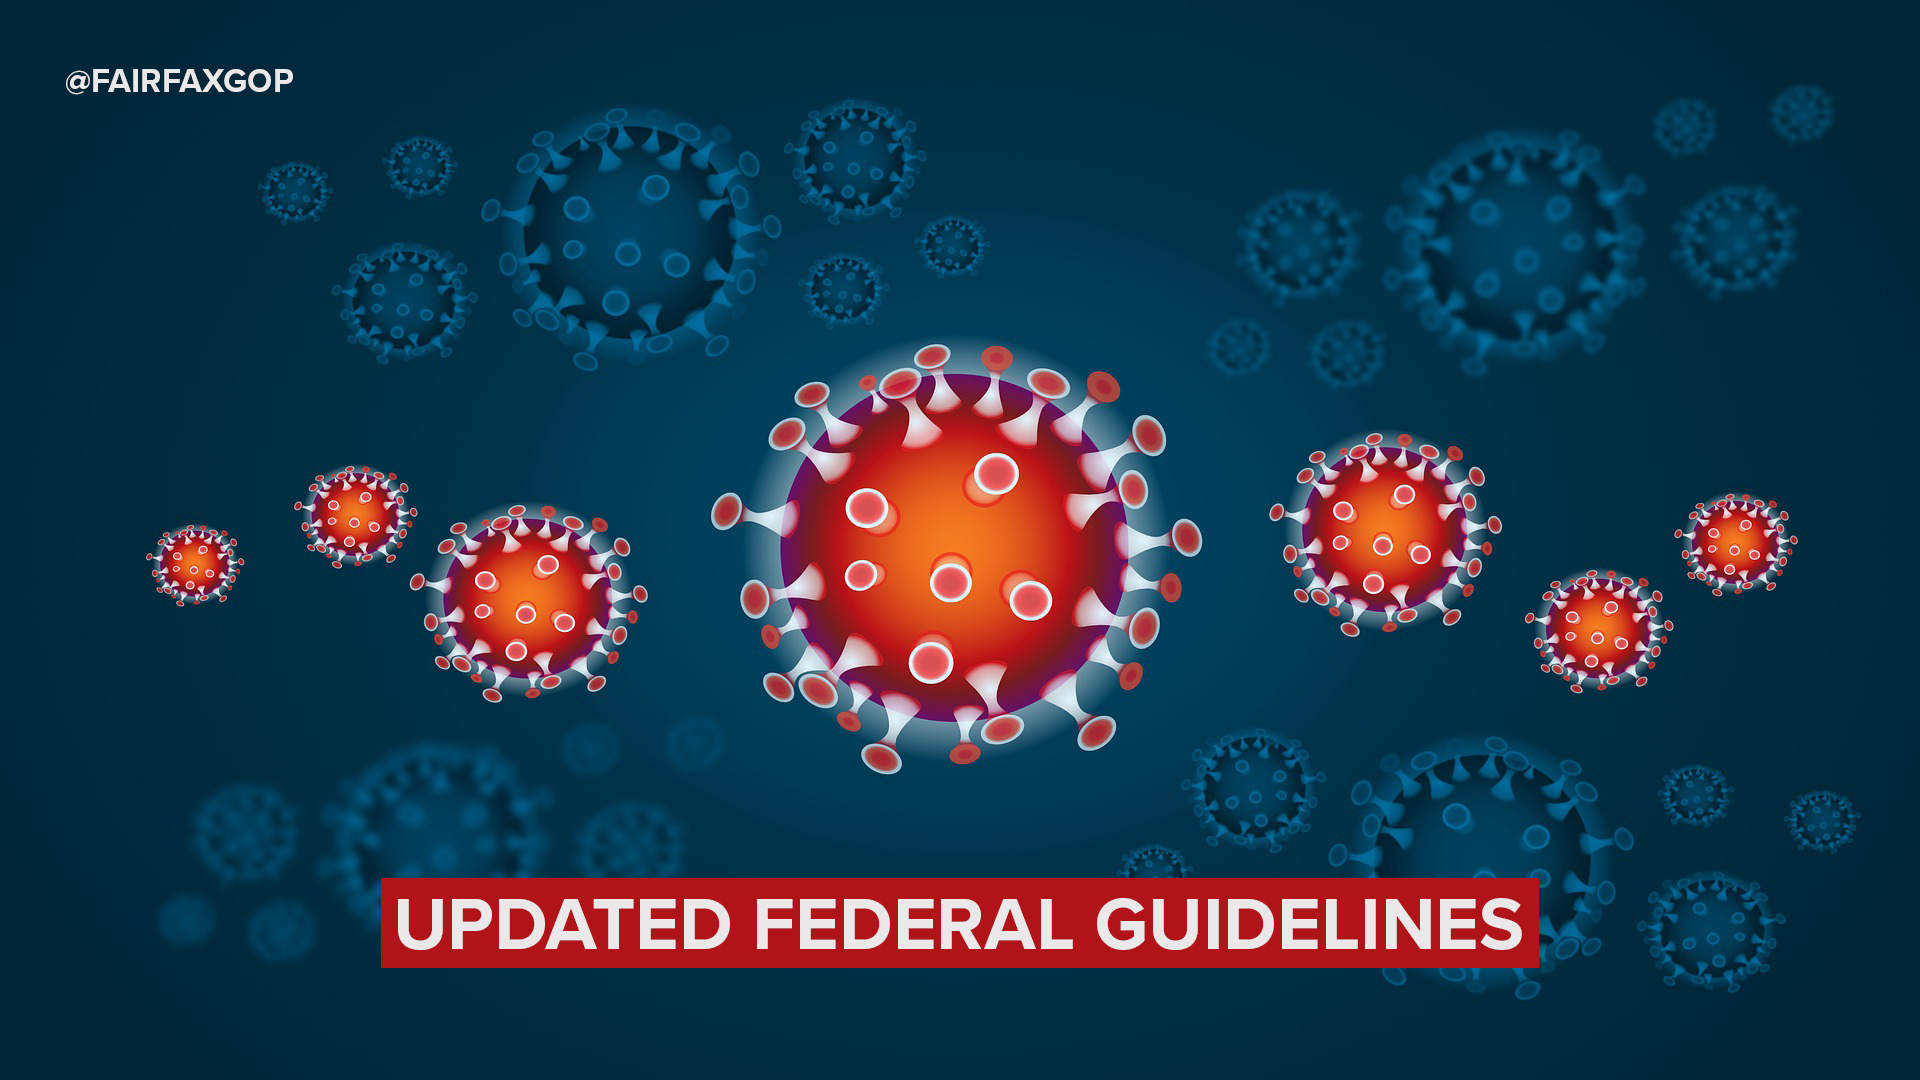 President Trump announced updated guidelines this week to continue slowing the spread of Coronavirus in America. This 30-day window will be crucial: If every American does his or her part, the latest model suggests we could save 1 million or more U.S. lives.

“We’re attacking the virus on every front with social distancing, economic support for our workers, rapid medical intervention—and very serious innovation—and banning dangerous foreign travel that threatens the health of our people,” President Trump said